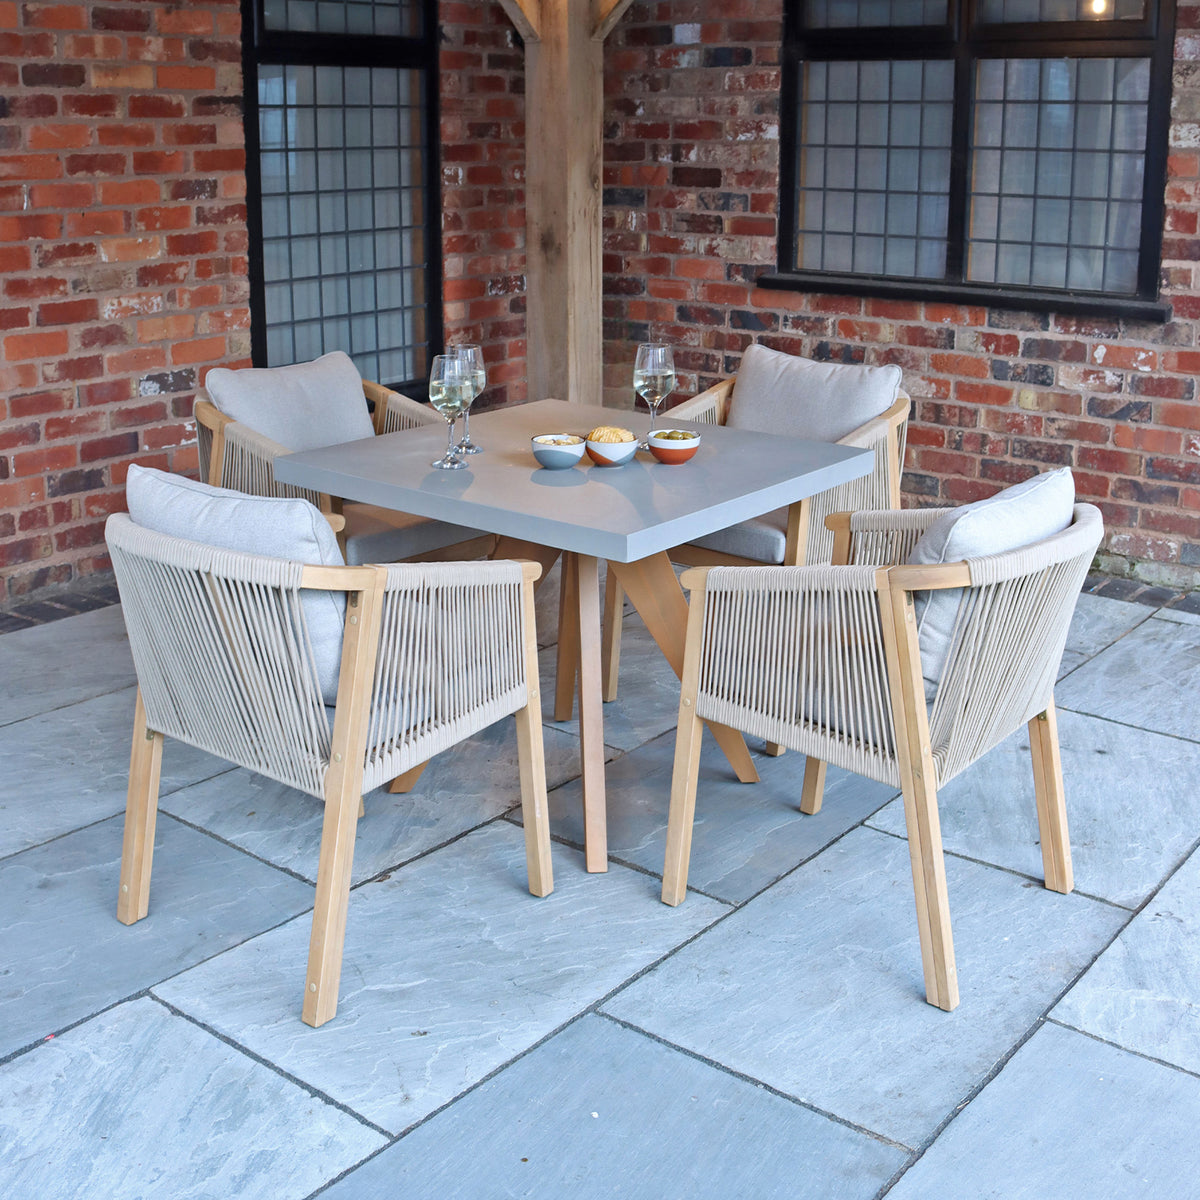 Luna 90cm Square Concrete Table Set with 4 Dining Chairs from Roseland Furniture